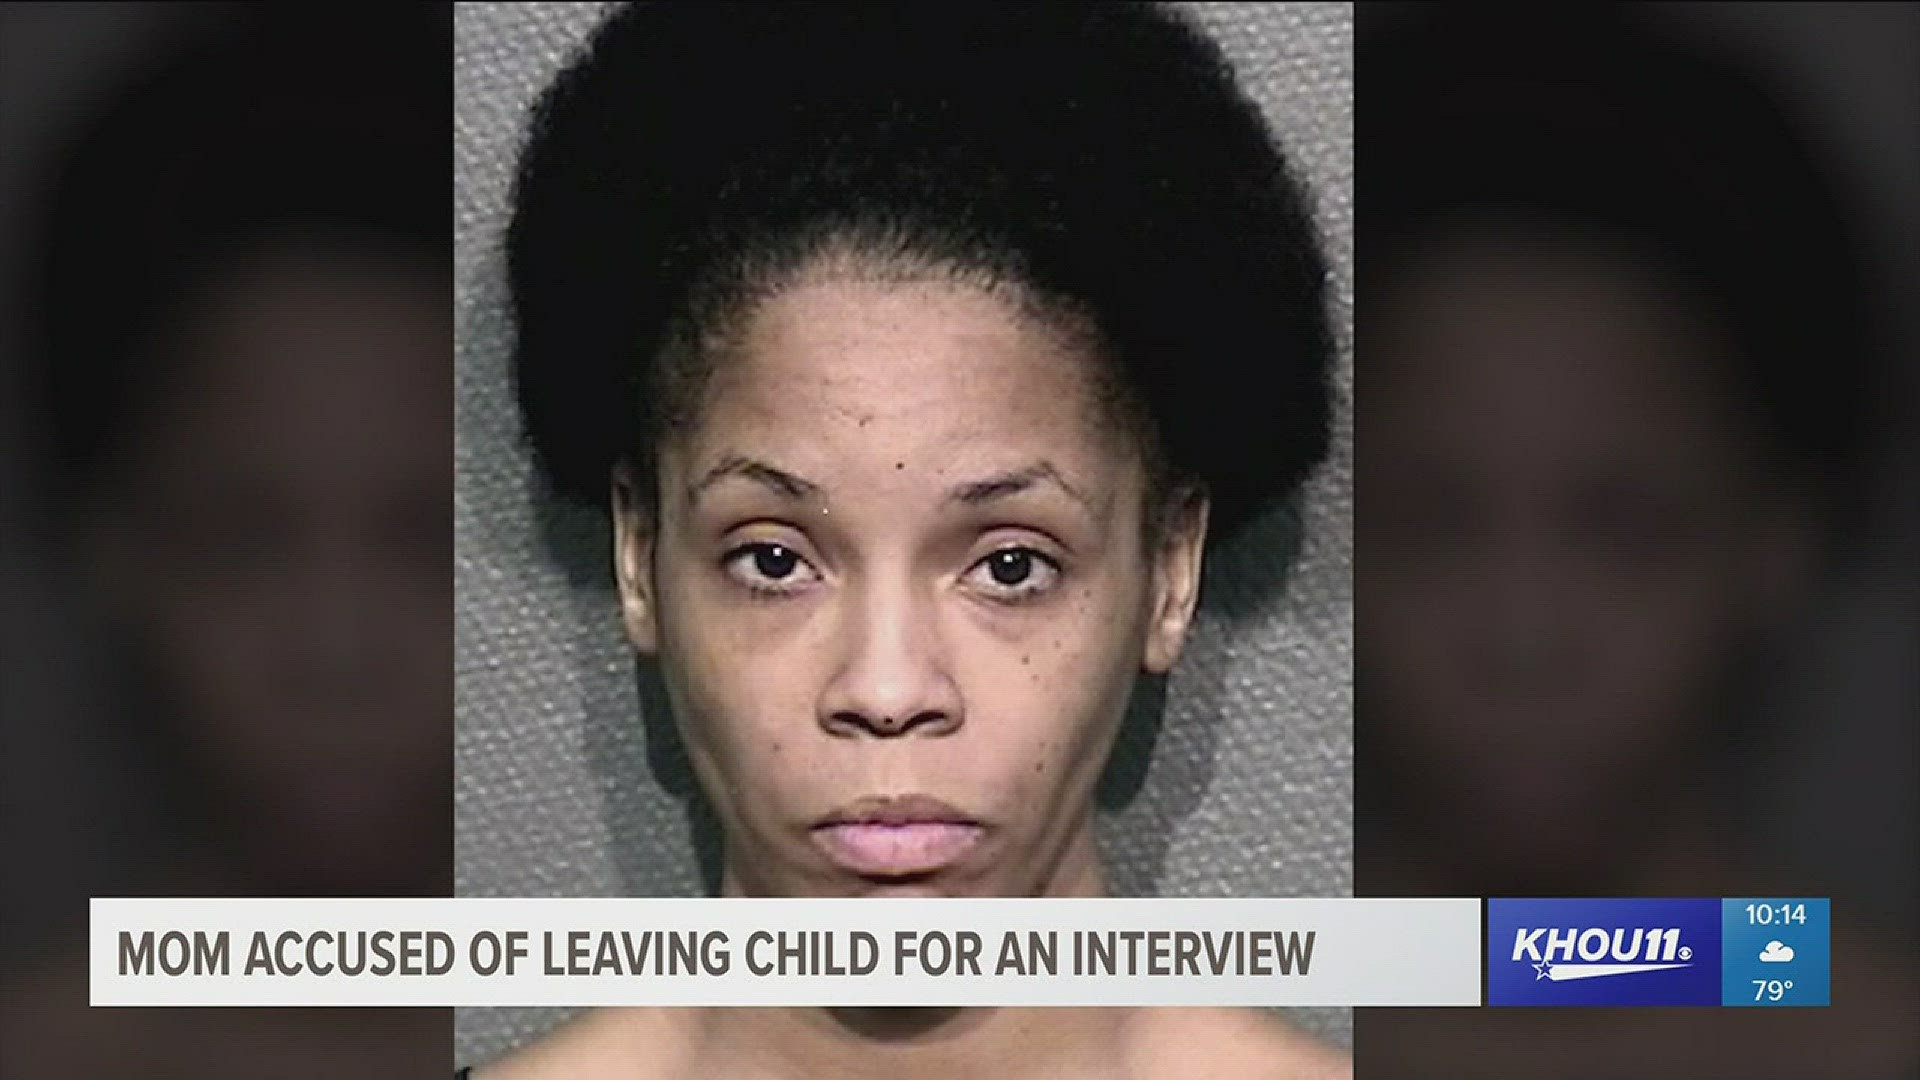 A mother is facing new charges after police say she left her child in a hot car while she was at a job interview.